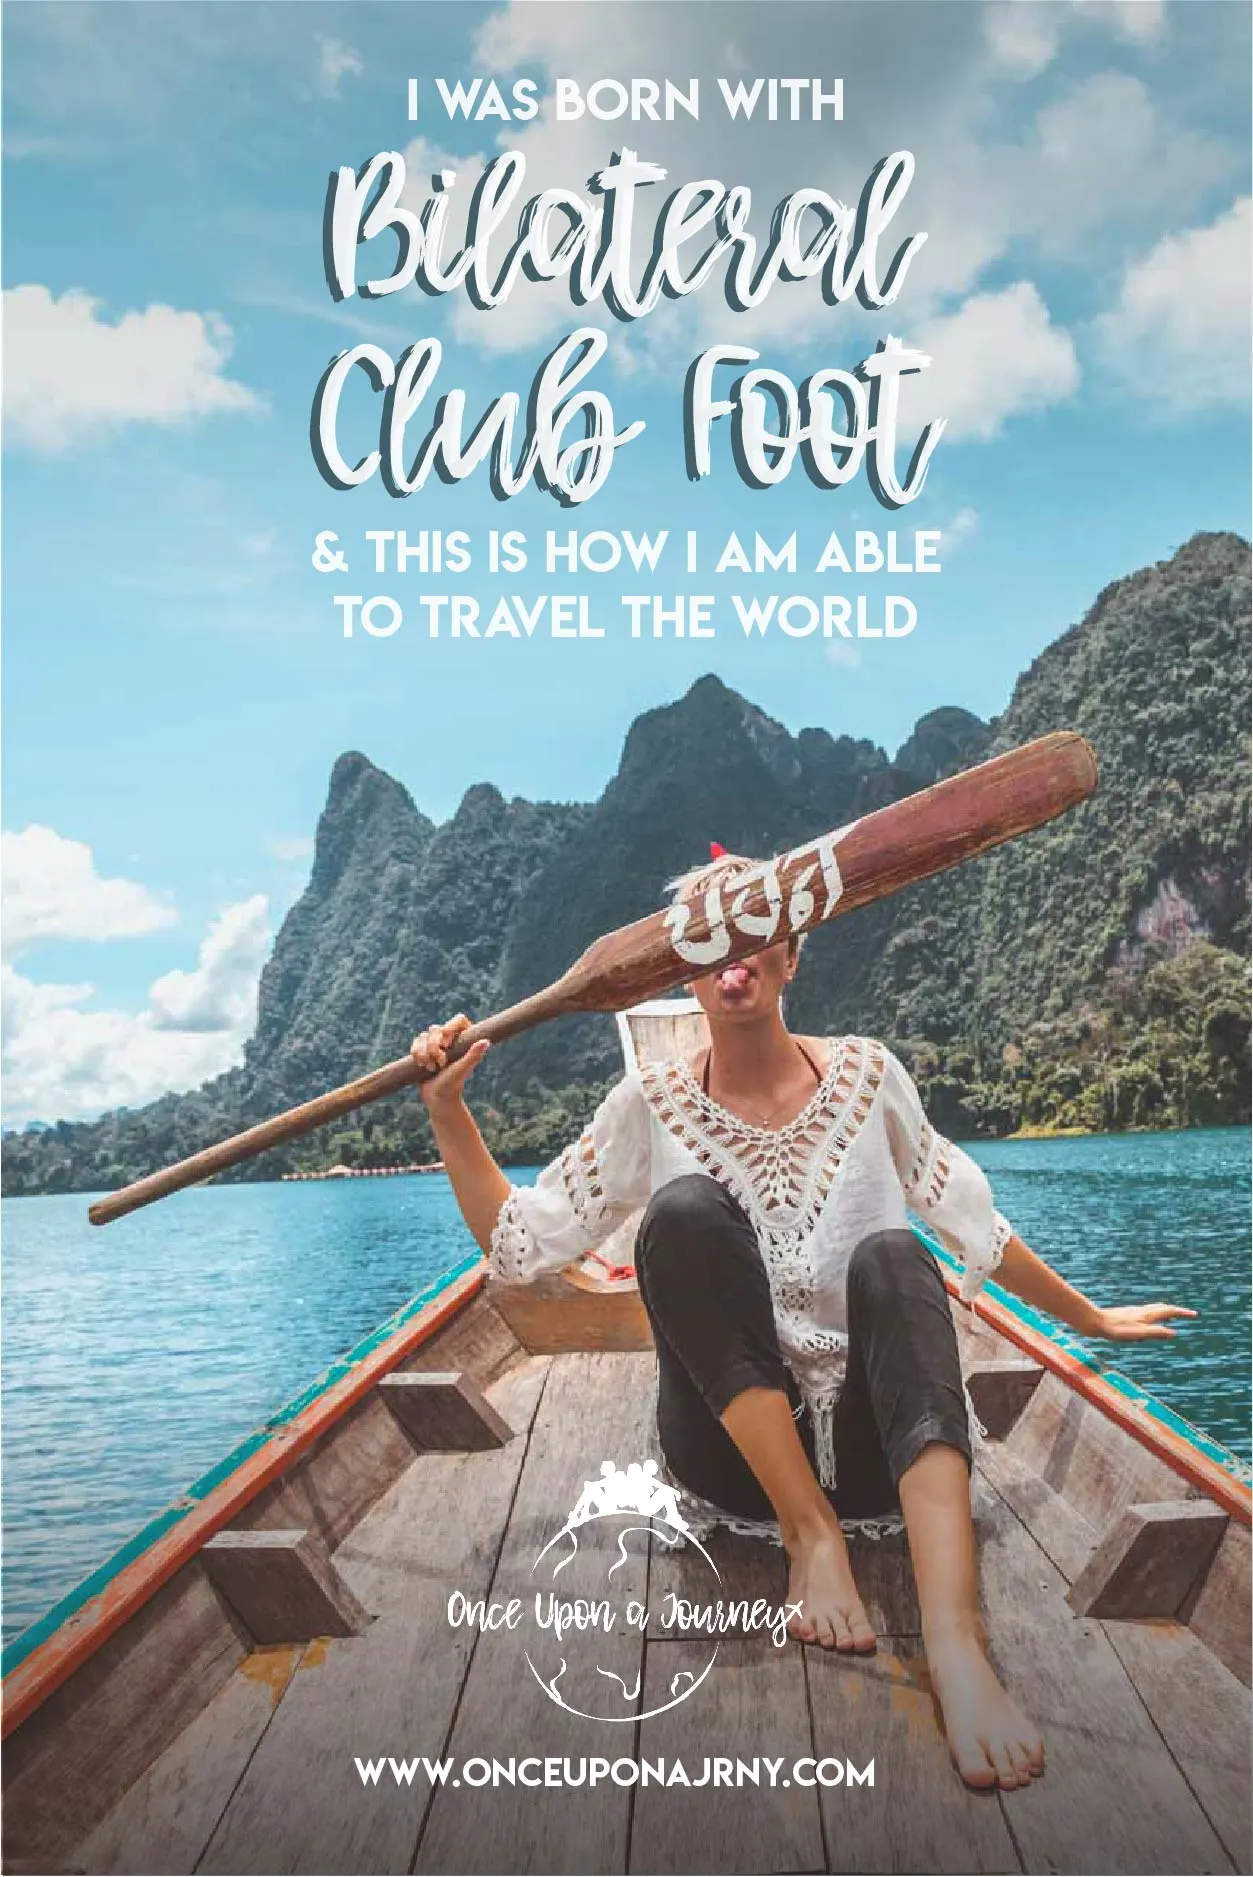 I was born with bilateral club foot and THIS is how I am able to travel the world | Once Upon A Journey LGBT Travel Blog #clubfoot #bilateralclubfoot #ctev #travel #travelwithdisability #hallux #fitsyourfeet